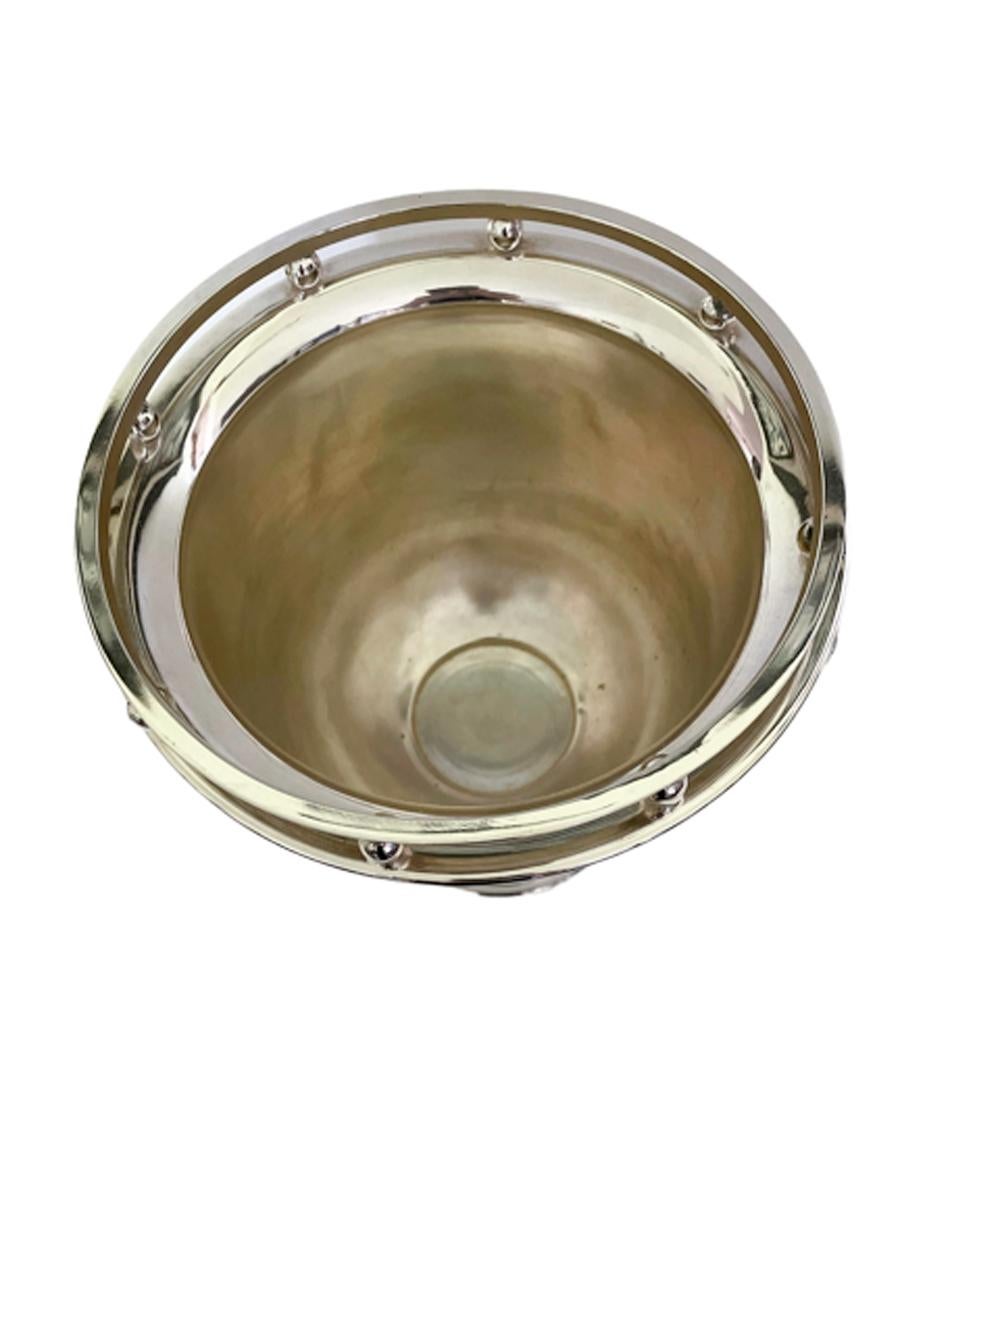 Midcentury Silver Plate Pedestaled Wine / Champagne Bucket W/Galleried Rim For Sale 1